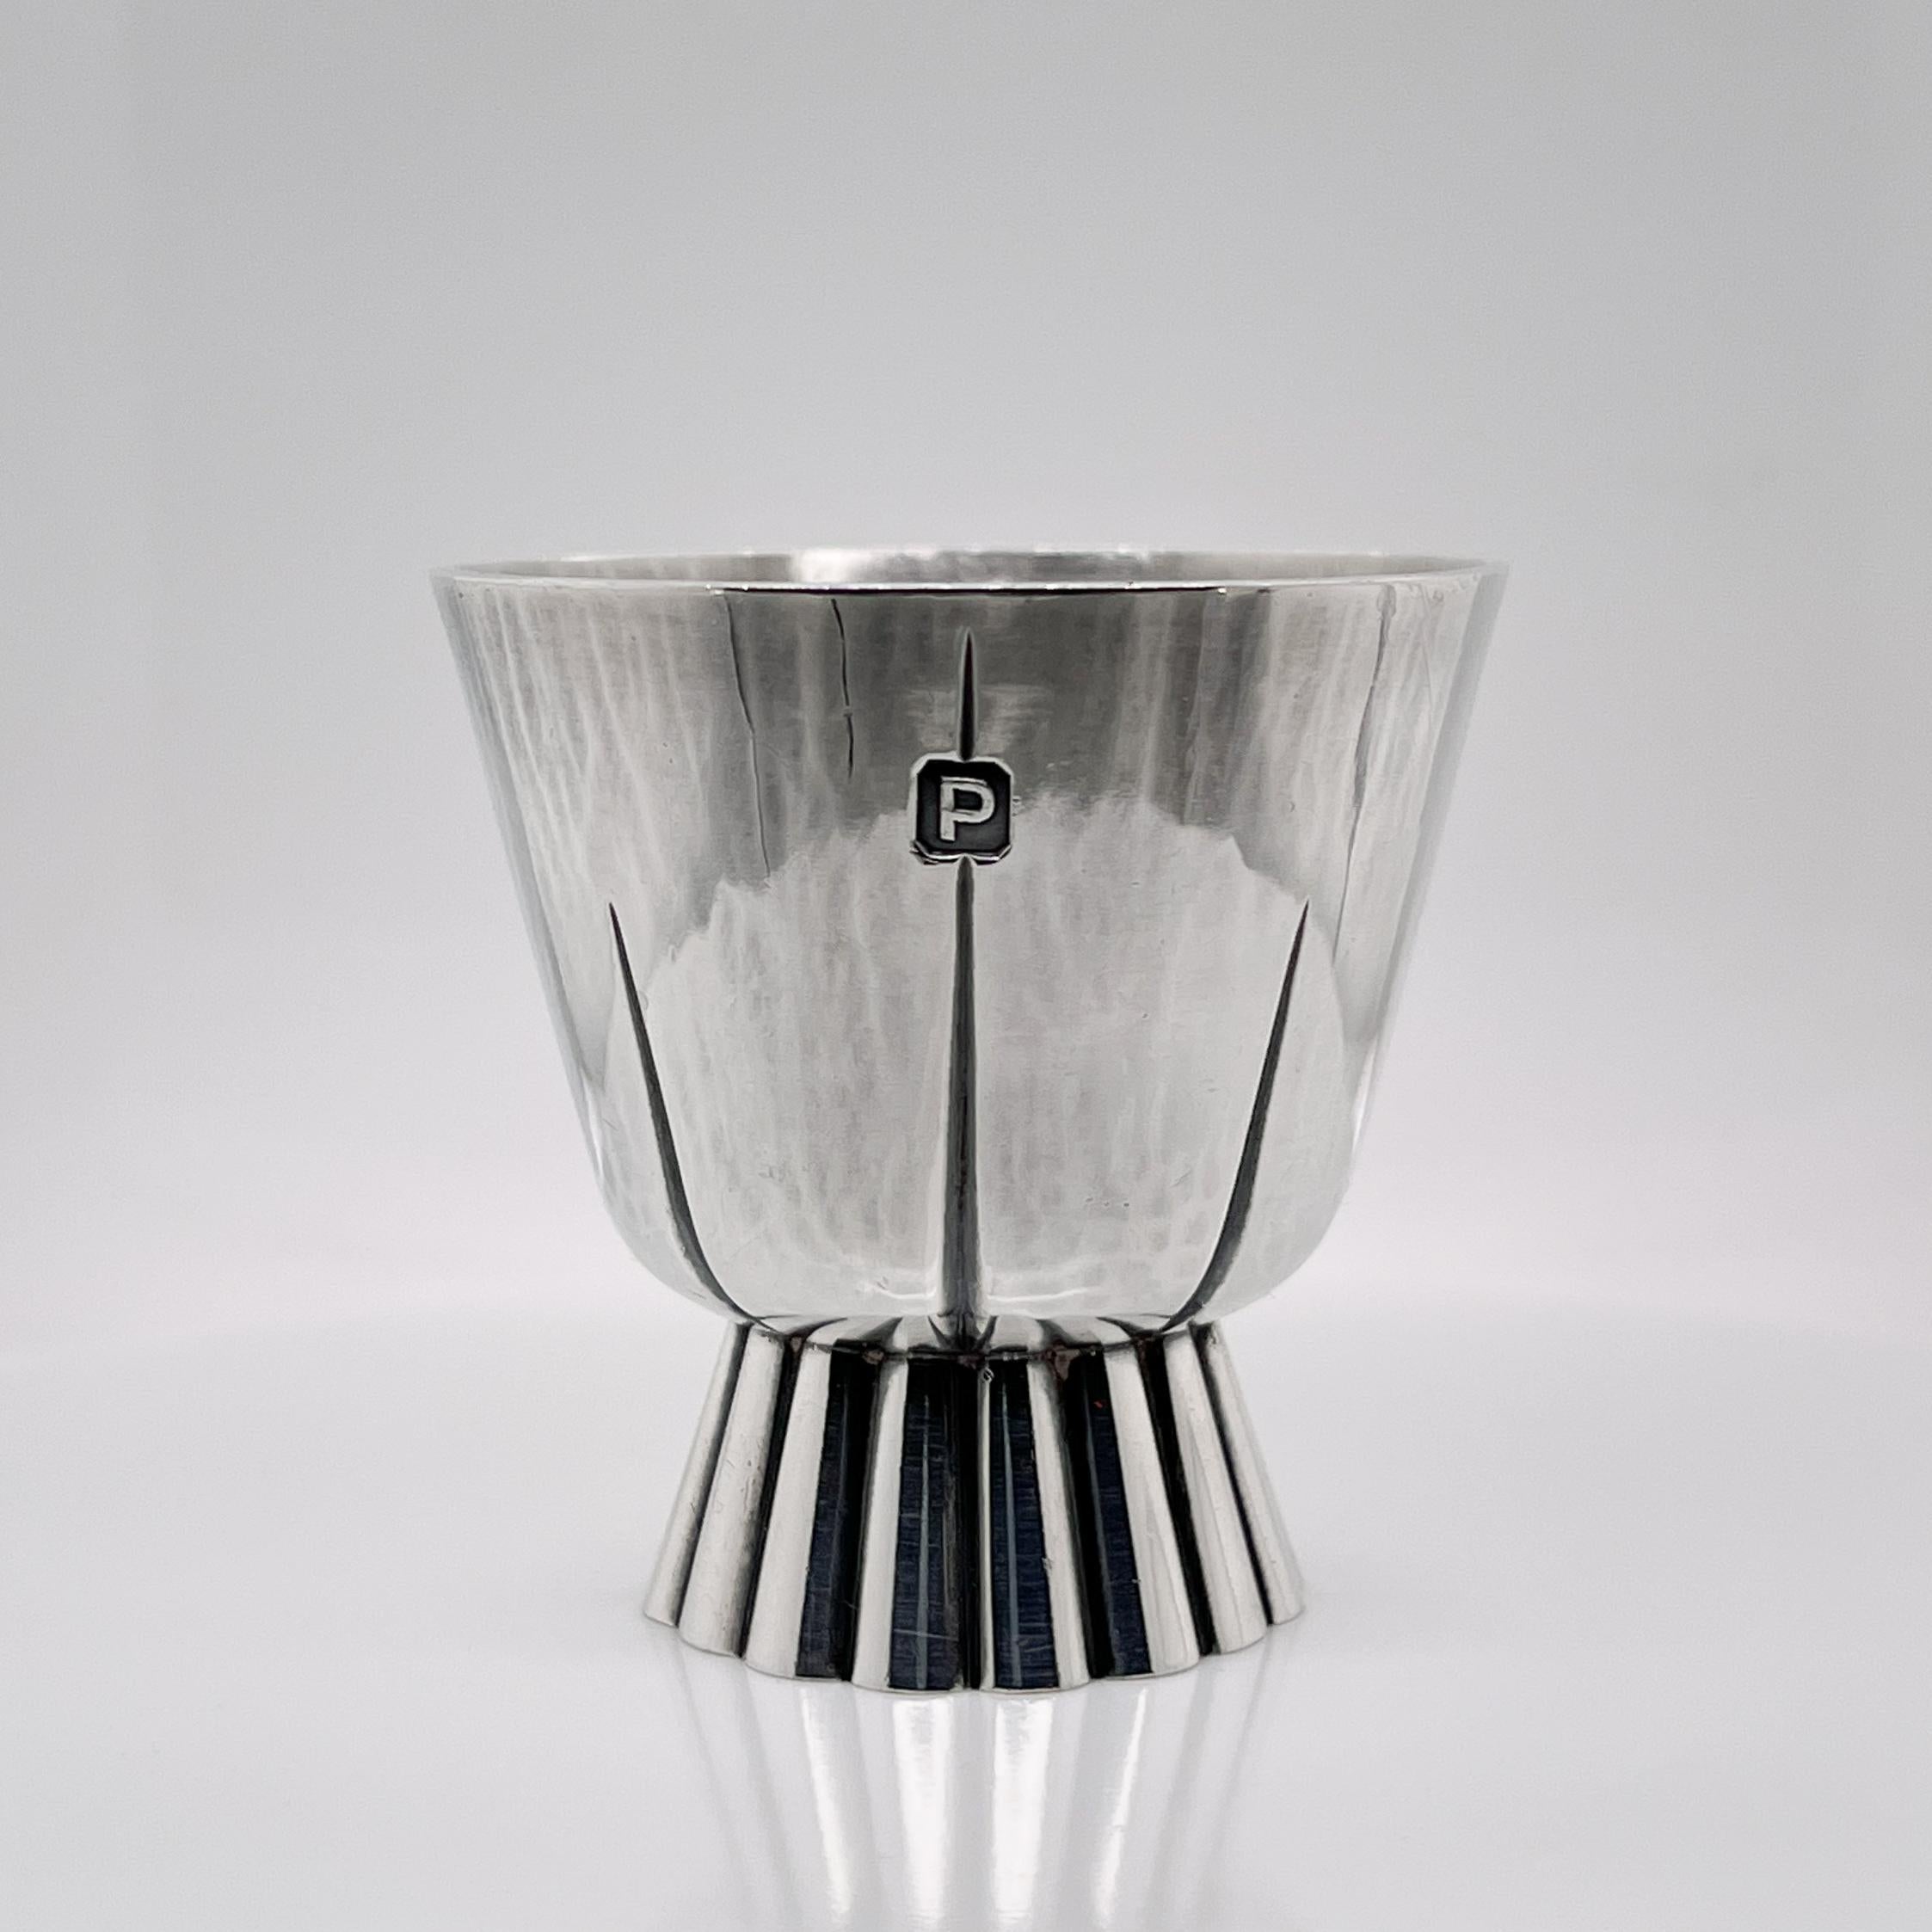 A fine English sterling silver diminutive cup or shot glass.

By the contemporary English silversmith Adrian Gerald Sallis Benney. 

This work is marked with a hallmark for 1950, which is very early in the work-life of Gerald Benney. 

Simply an